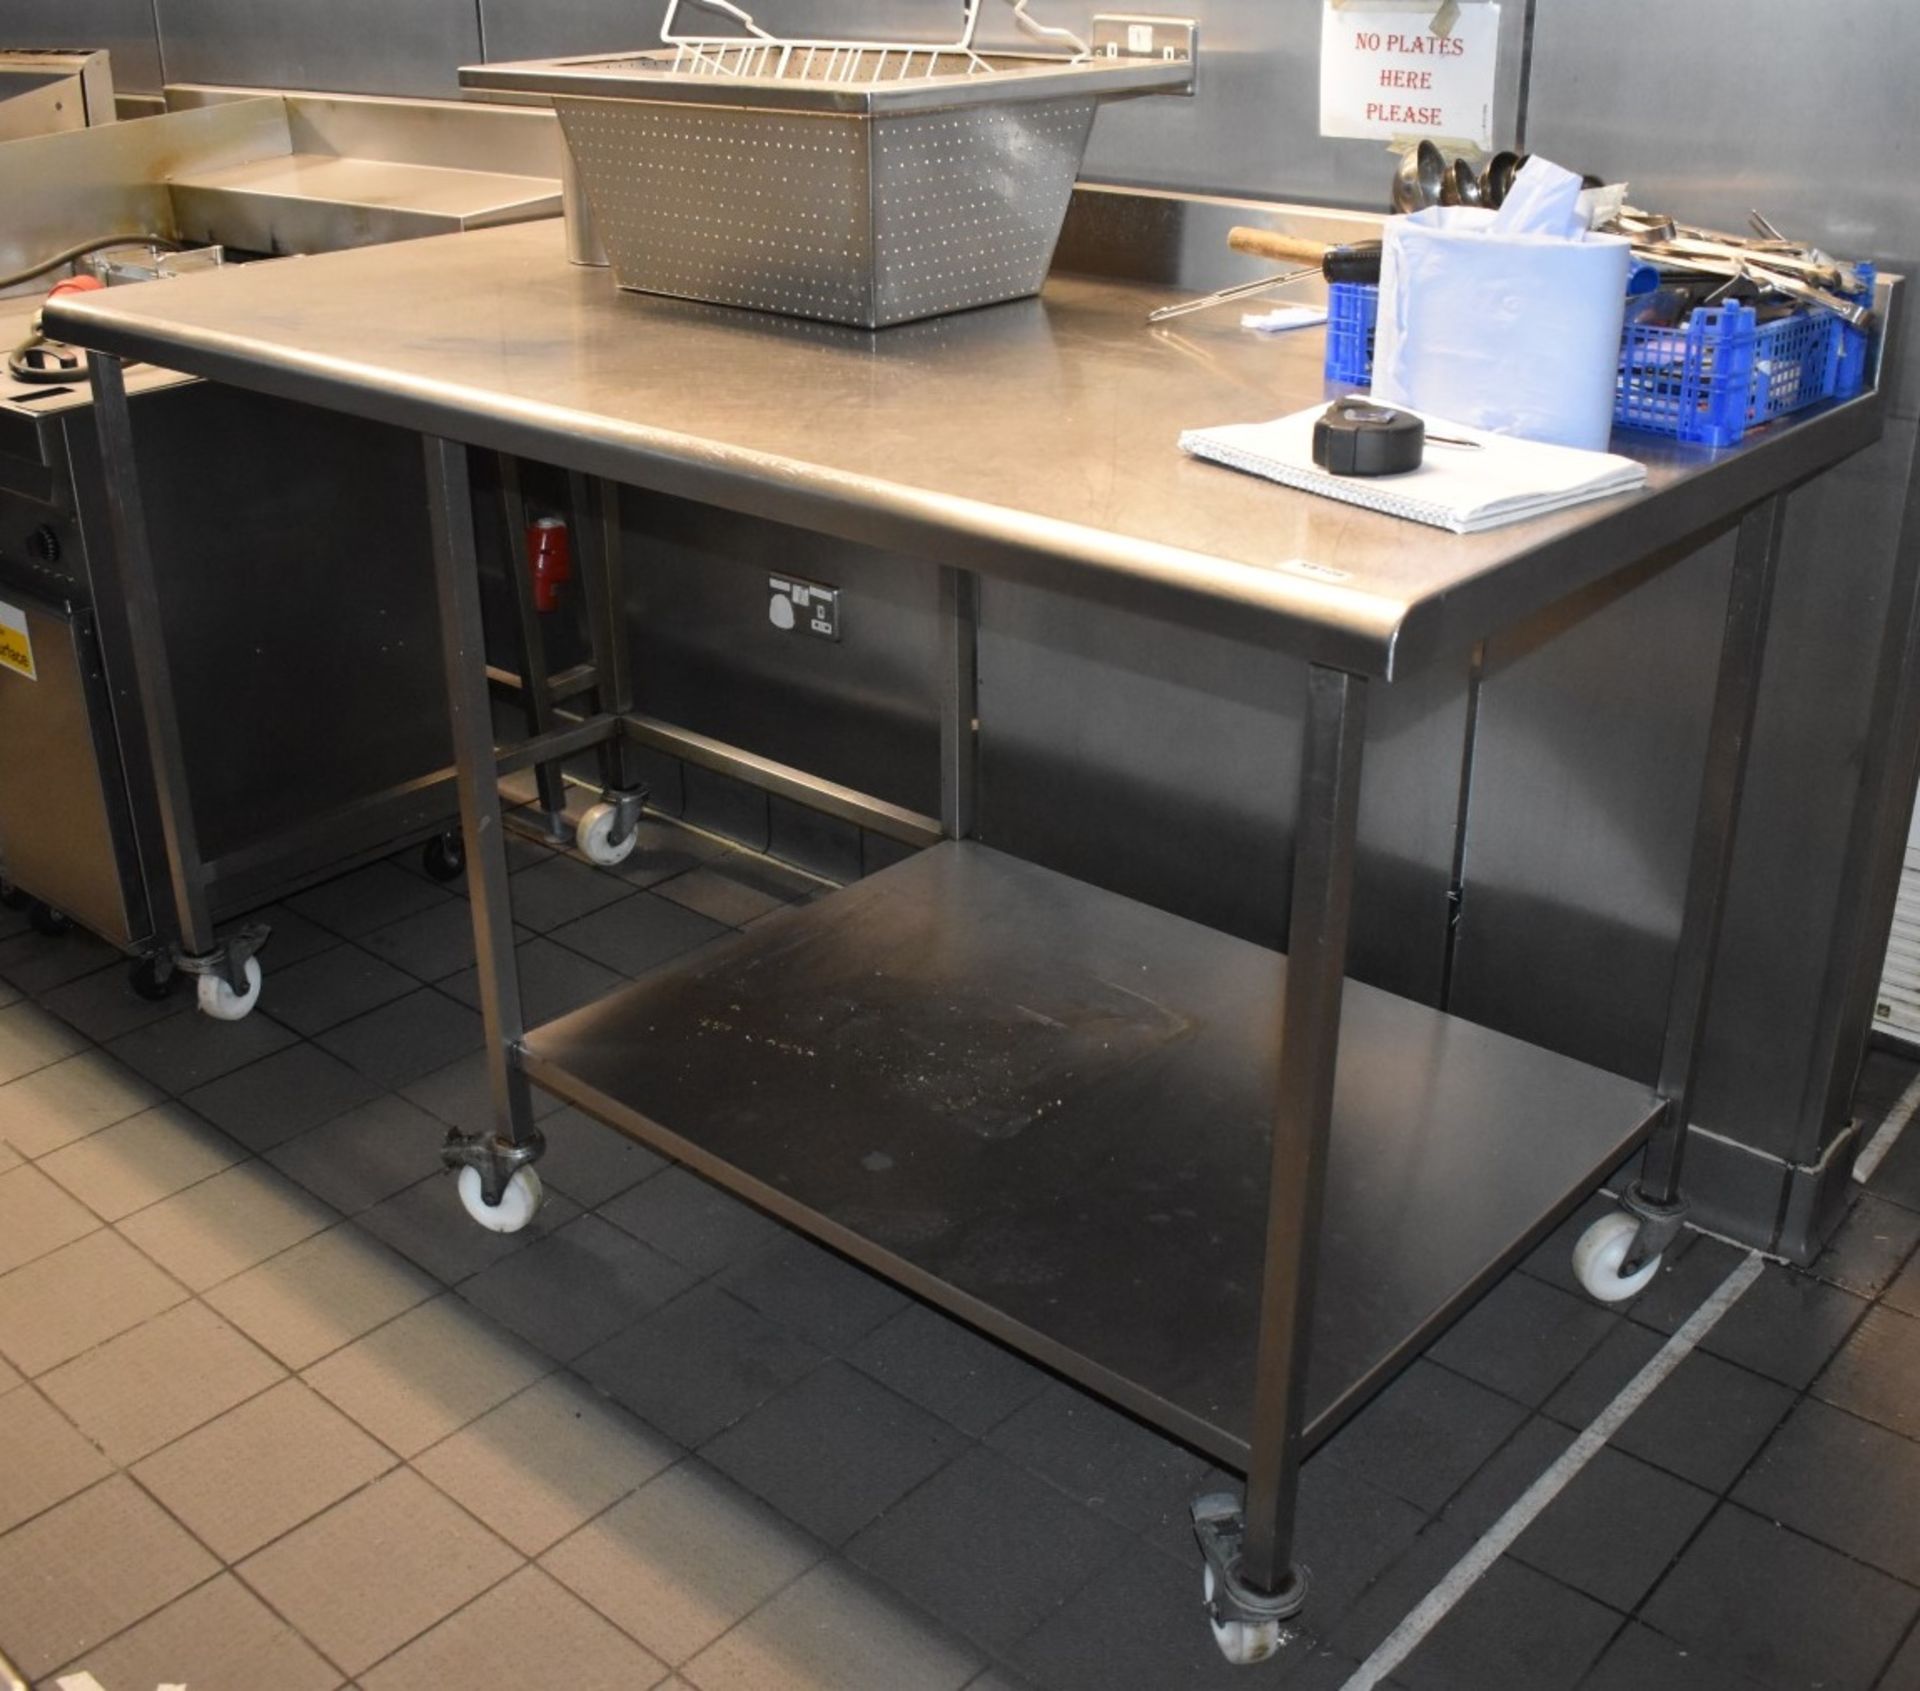 1 x Stainless Steel Prep Table With Undershelf and Castors - Size H99 x W184 x D91 cms - Ref: